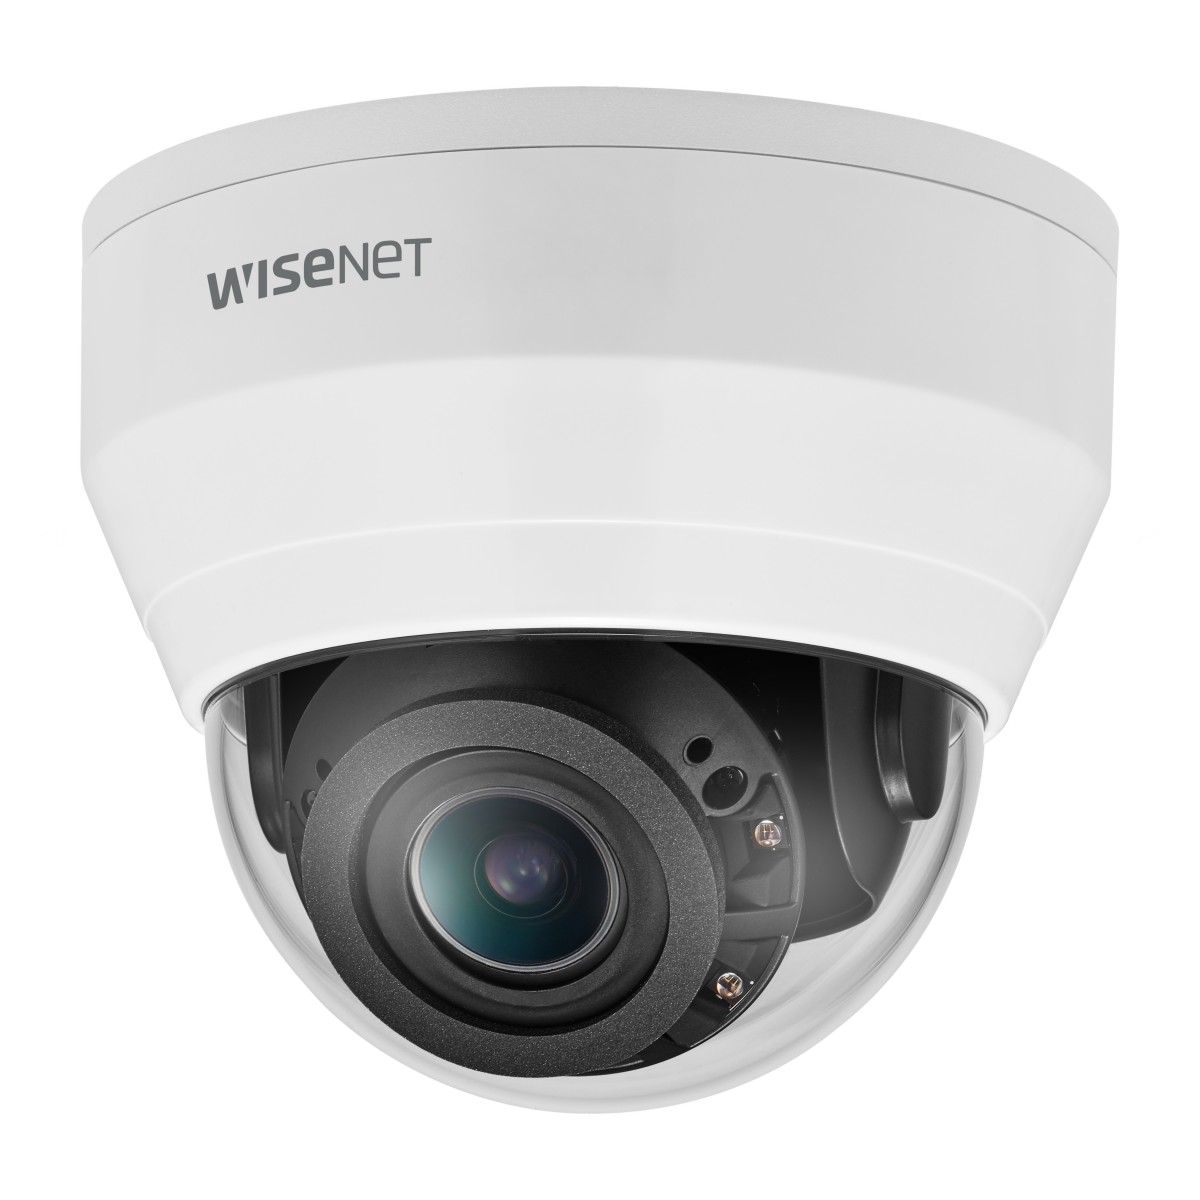 Hanwha Techwin Hanwha QND-8080R - IP security camera - Outdoor - Wired - Simplified Chinese - Traditional Chinese - Czech - Germ